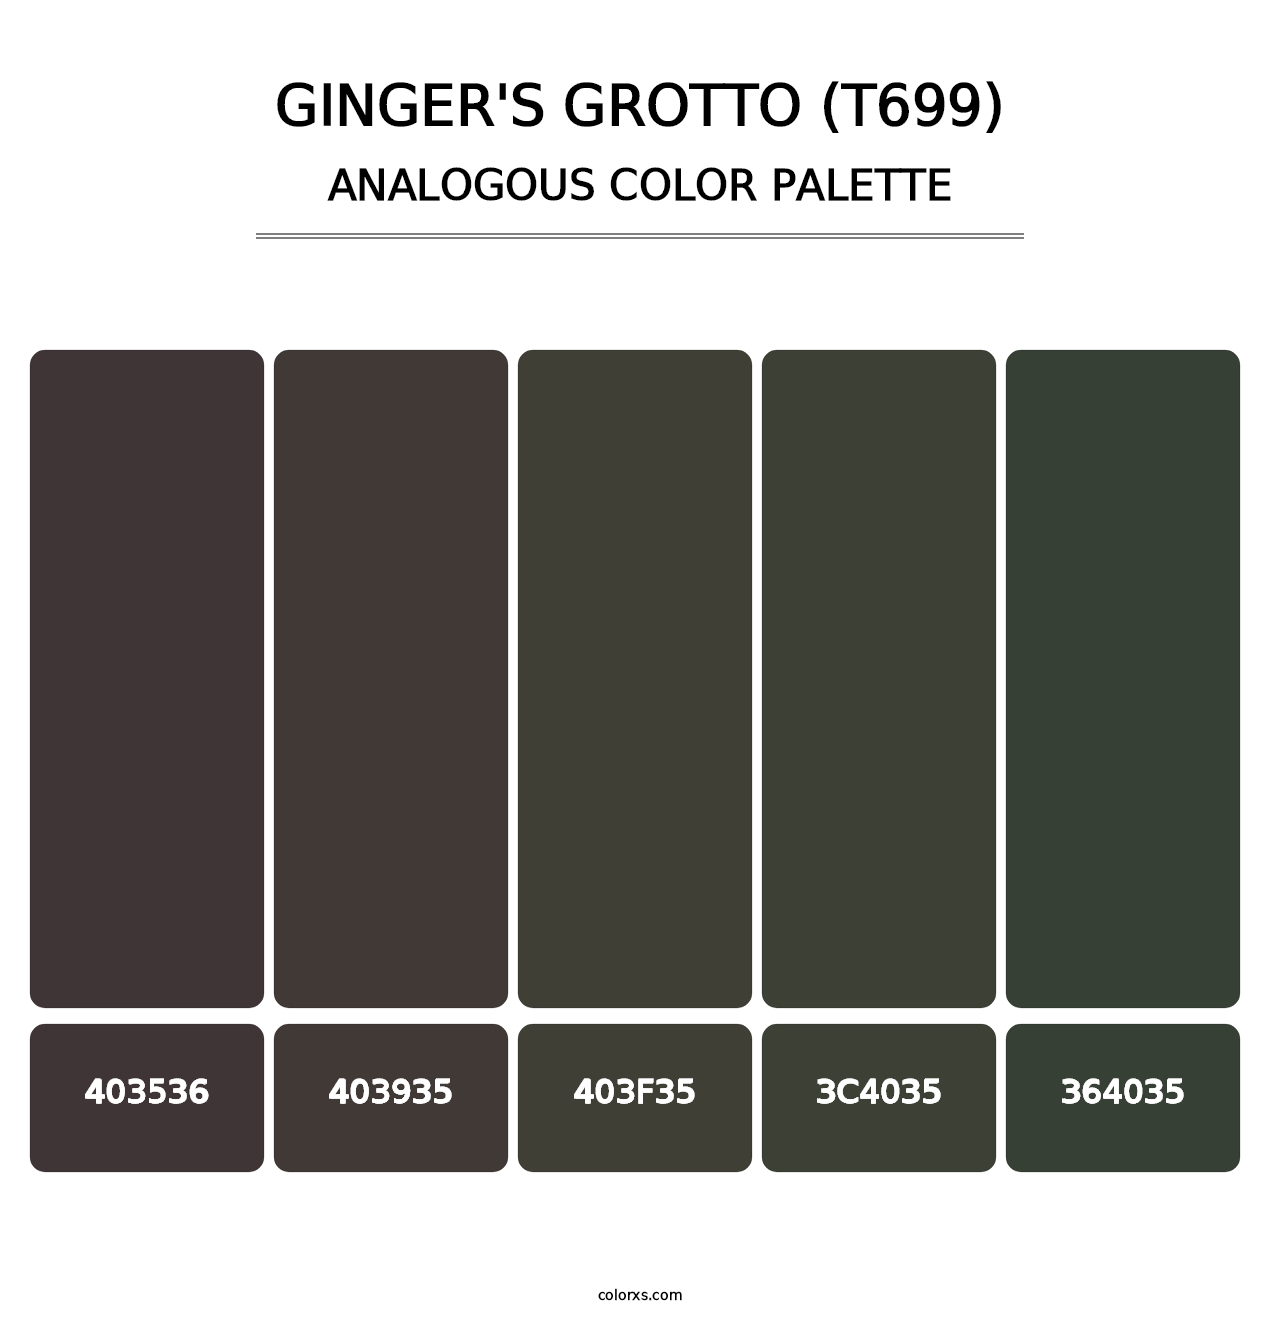 Ginger's Grotto (T699) - Analogous Color Palette